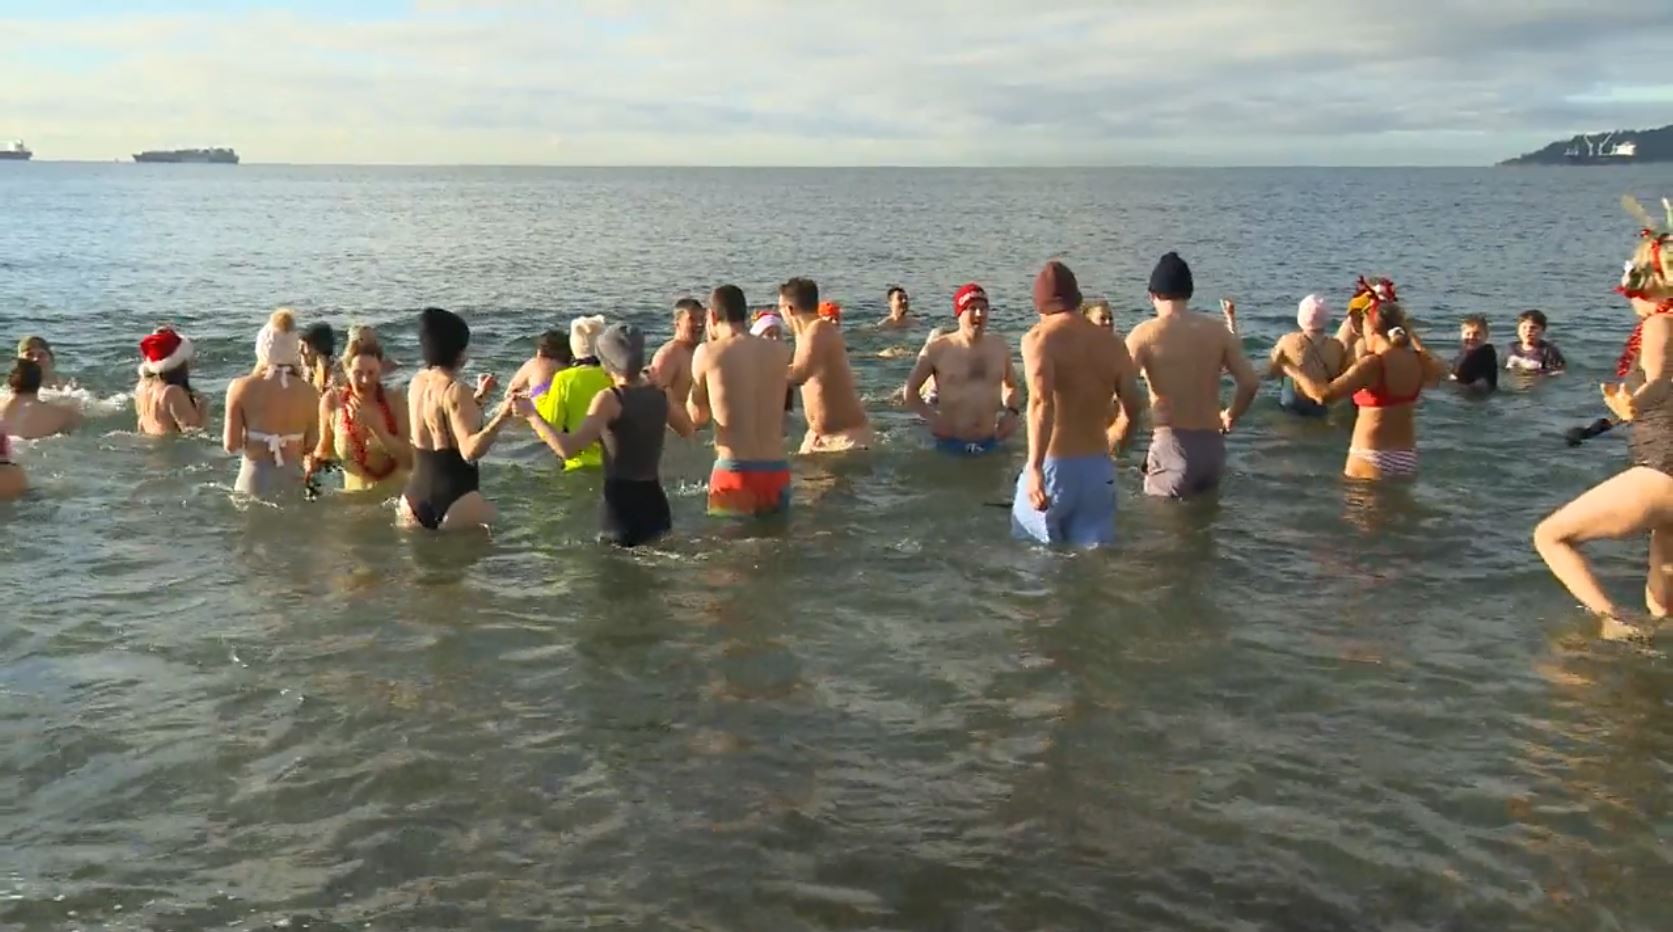 North Shore fundraiser ‘Plunge for Purpose’ works to support families in need